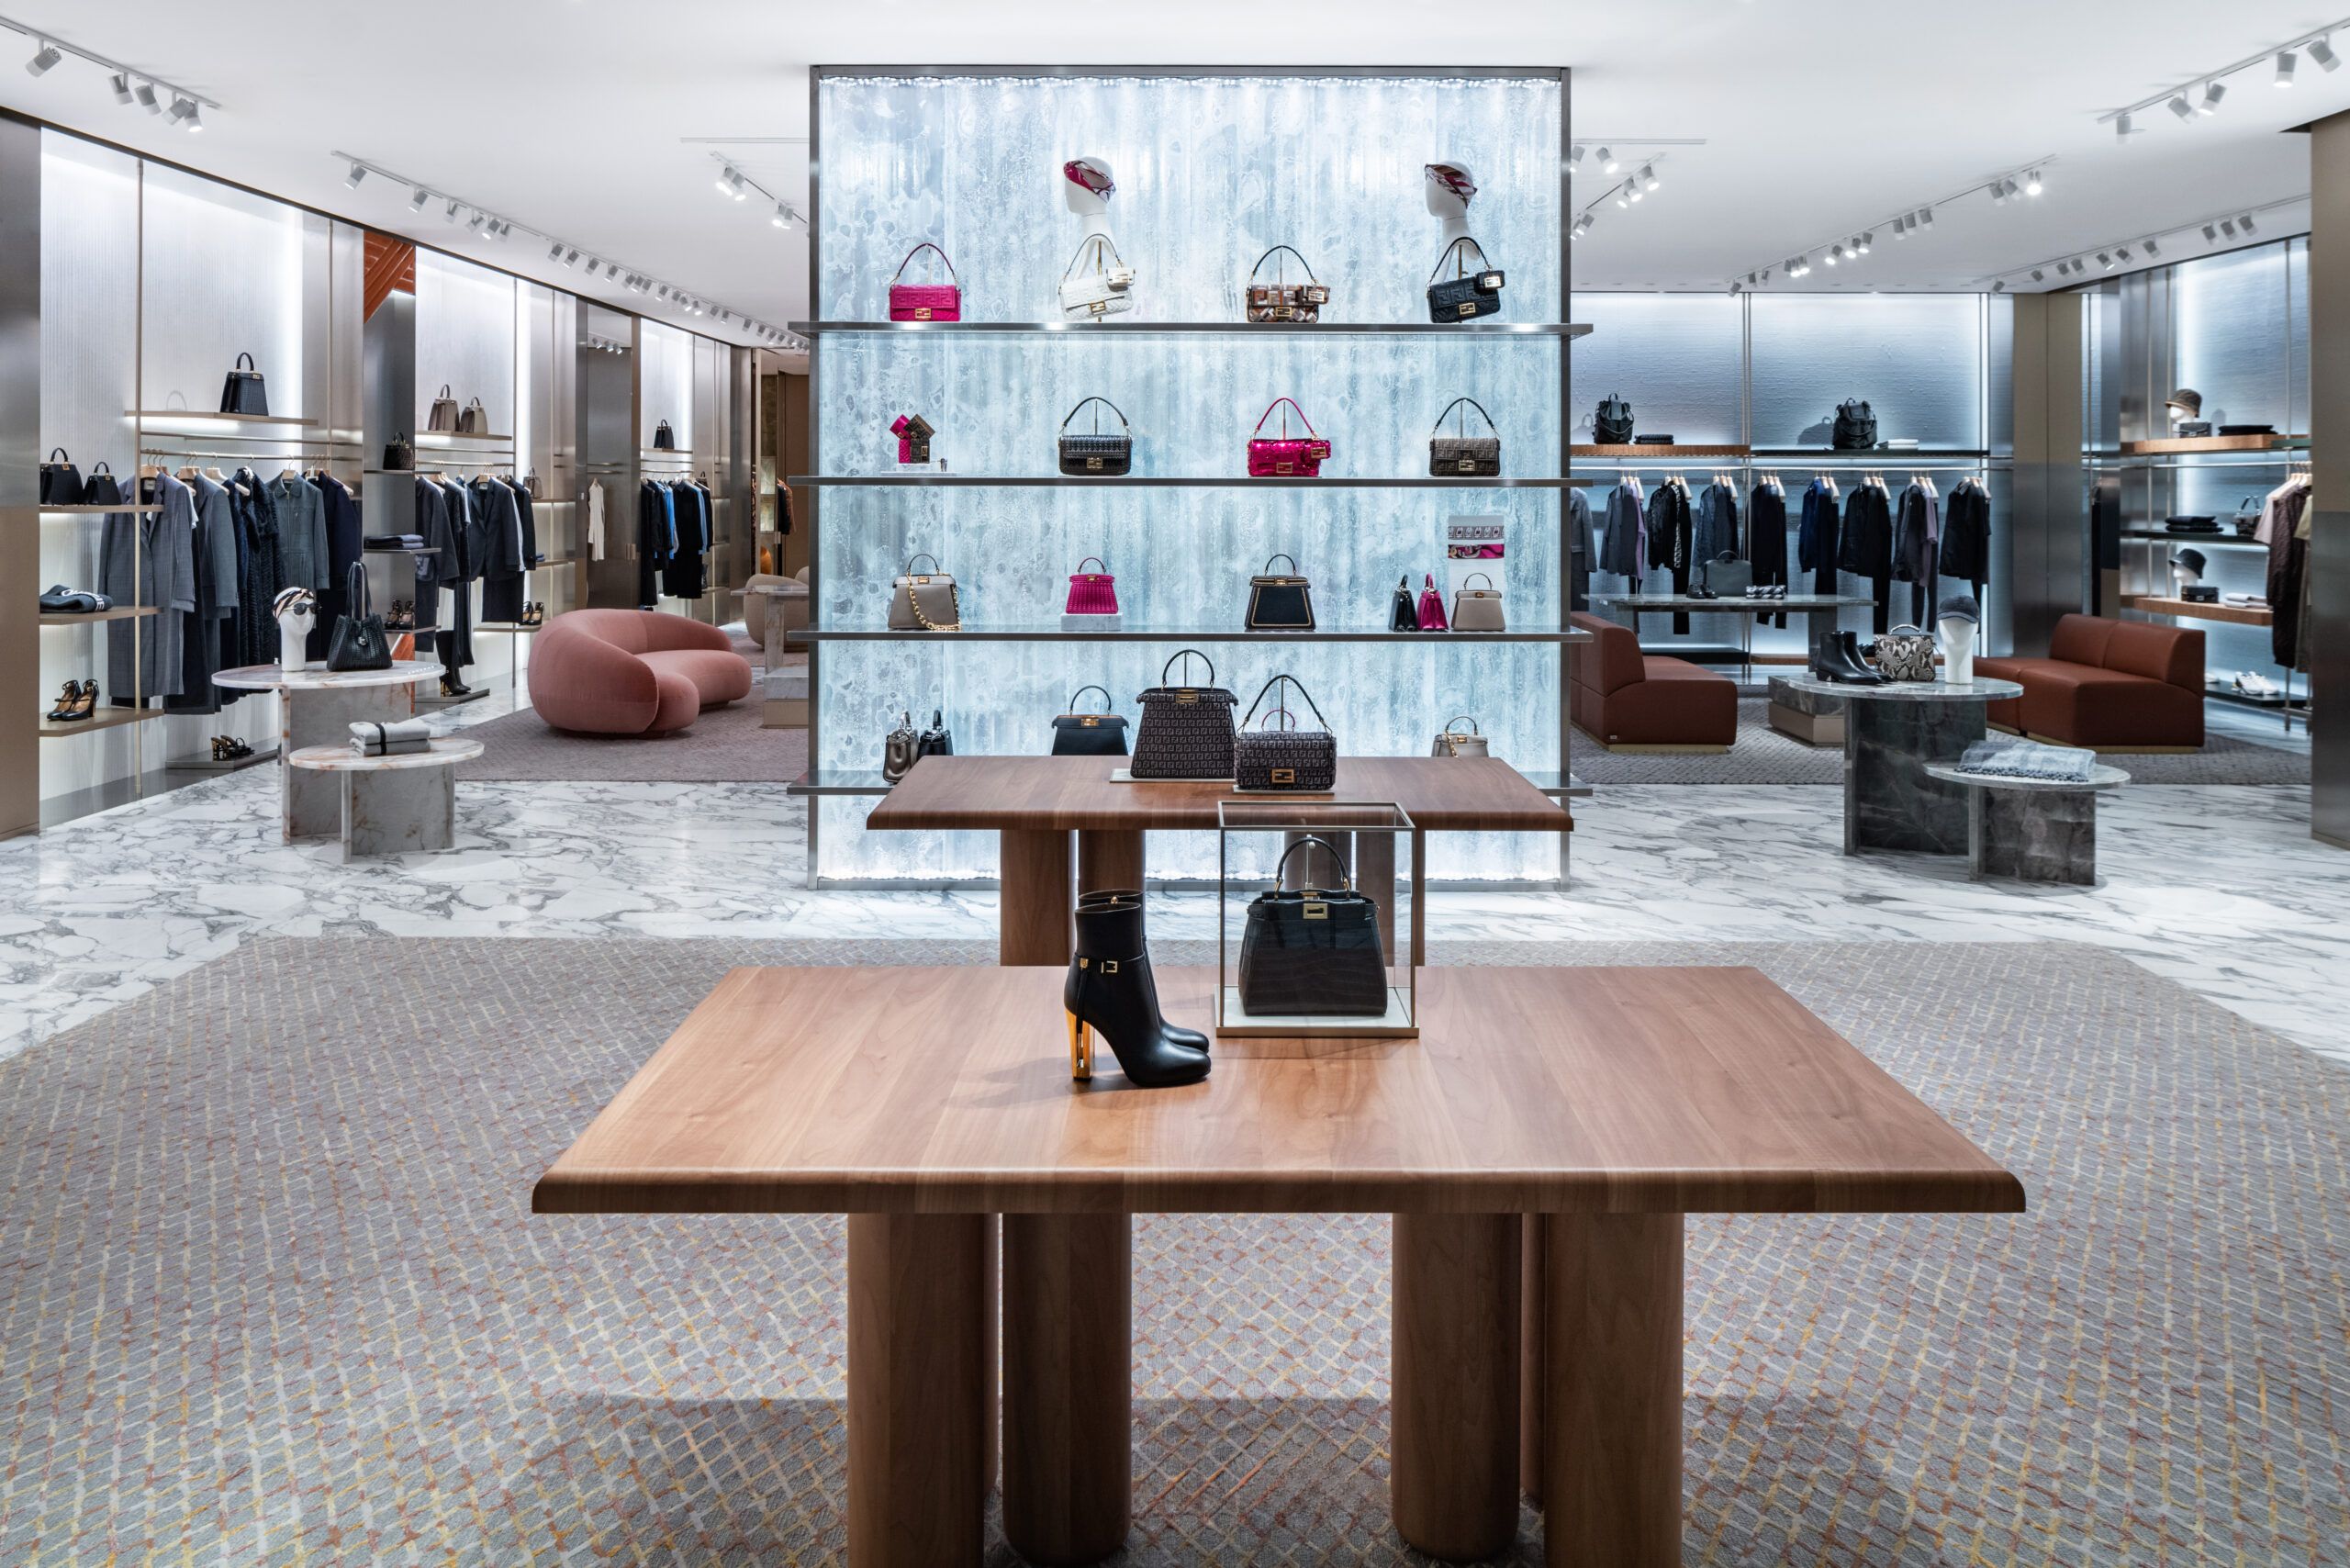 FENDI Opens New Boutique At Phipps Plaza Mall In Atlanta - Talking